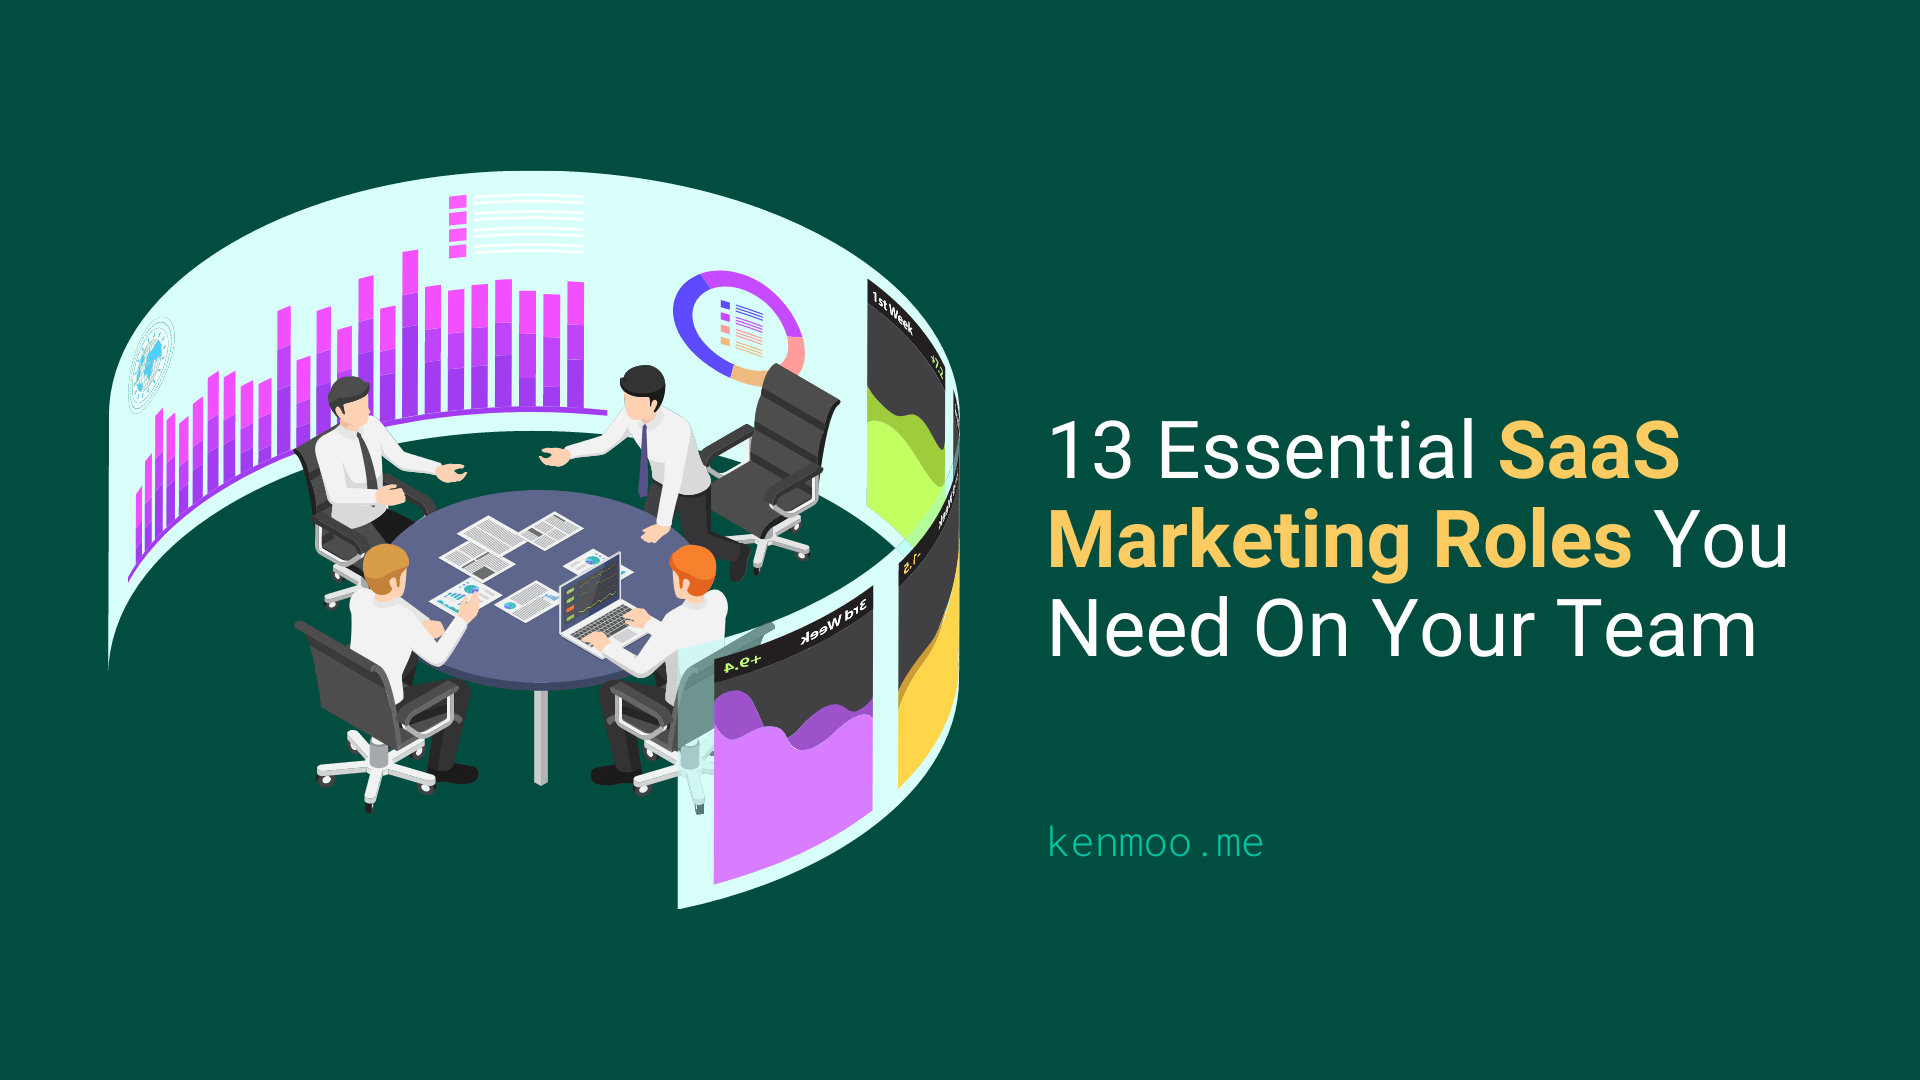 13 Essential SaaS Marketing Roles You Need On Your Team